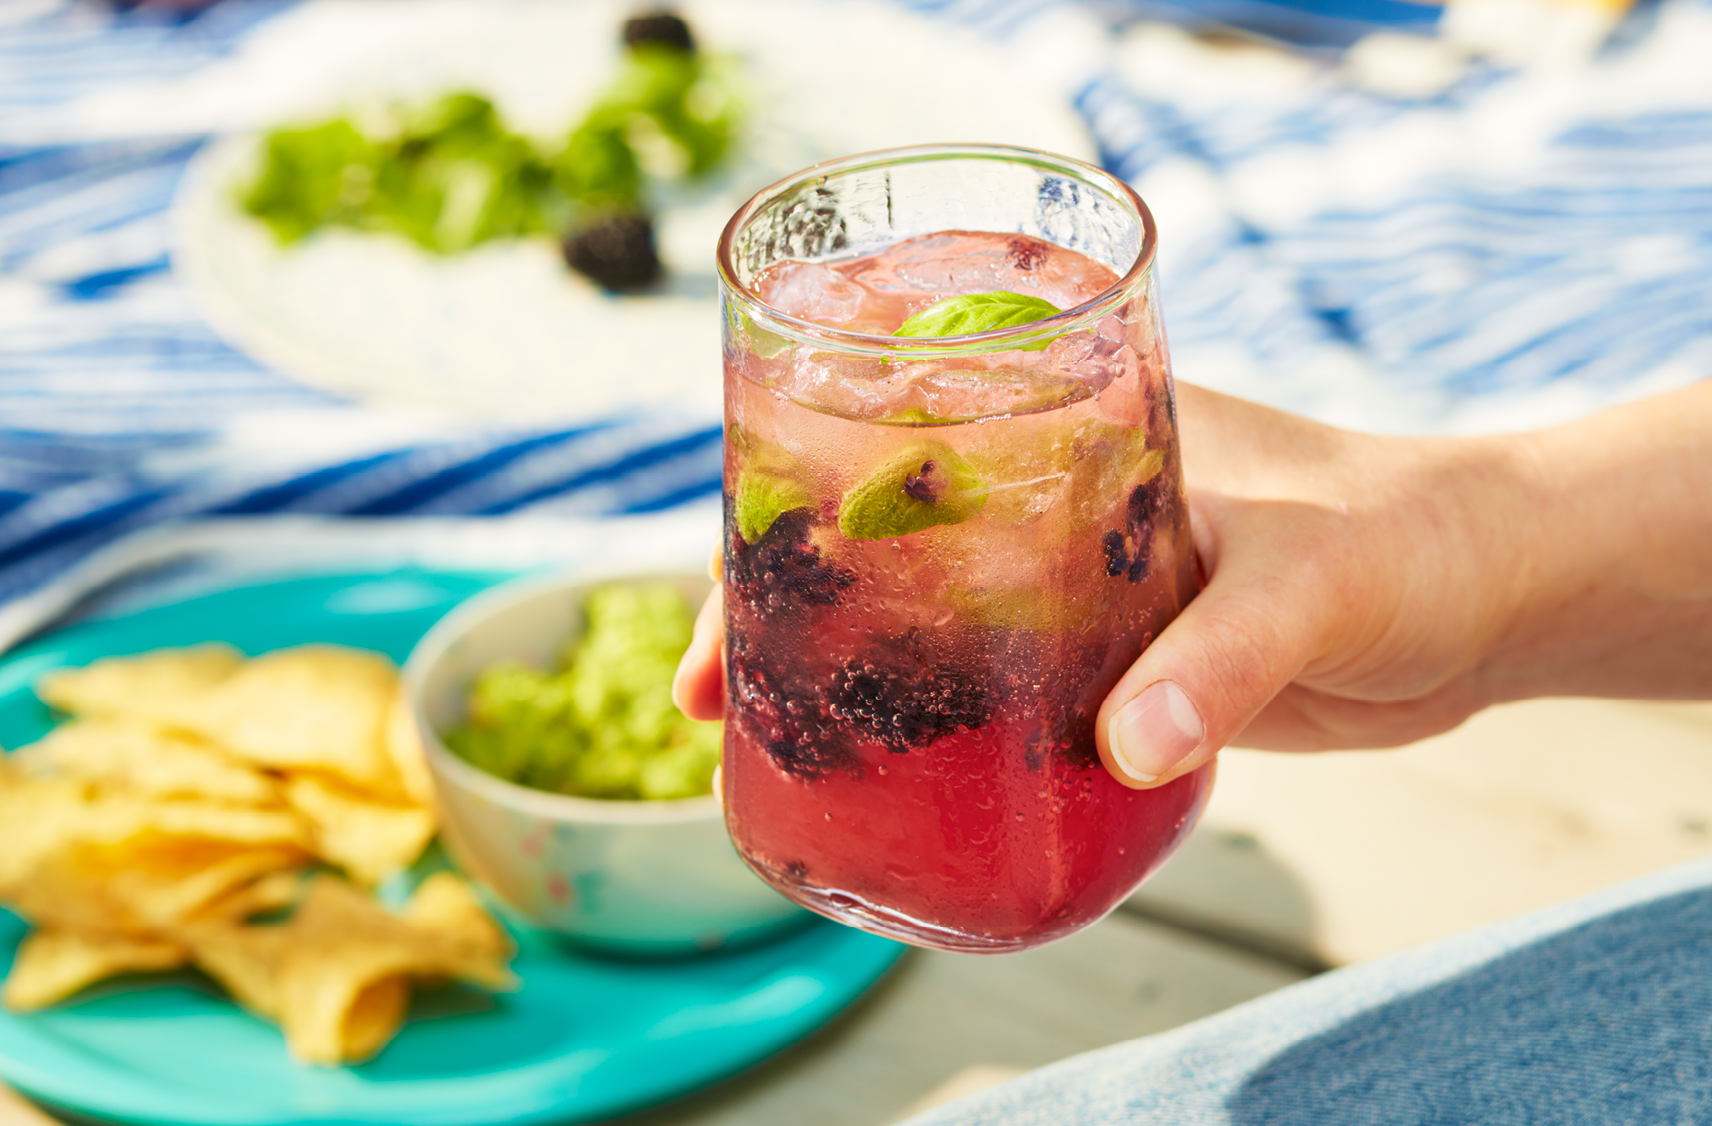 A hand holding a glass containing PC Organics Sparkling Water Kefir with blackberries and basil.  A plate of tortillas and guacamole are seen at a distance.